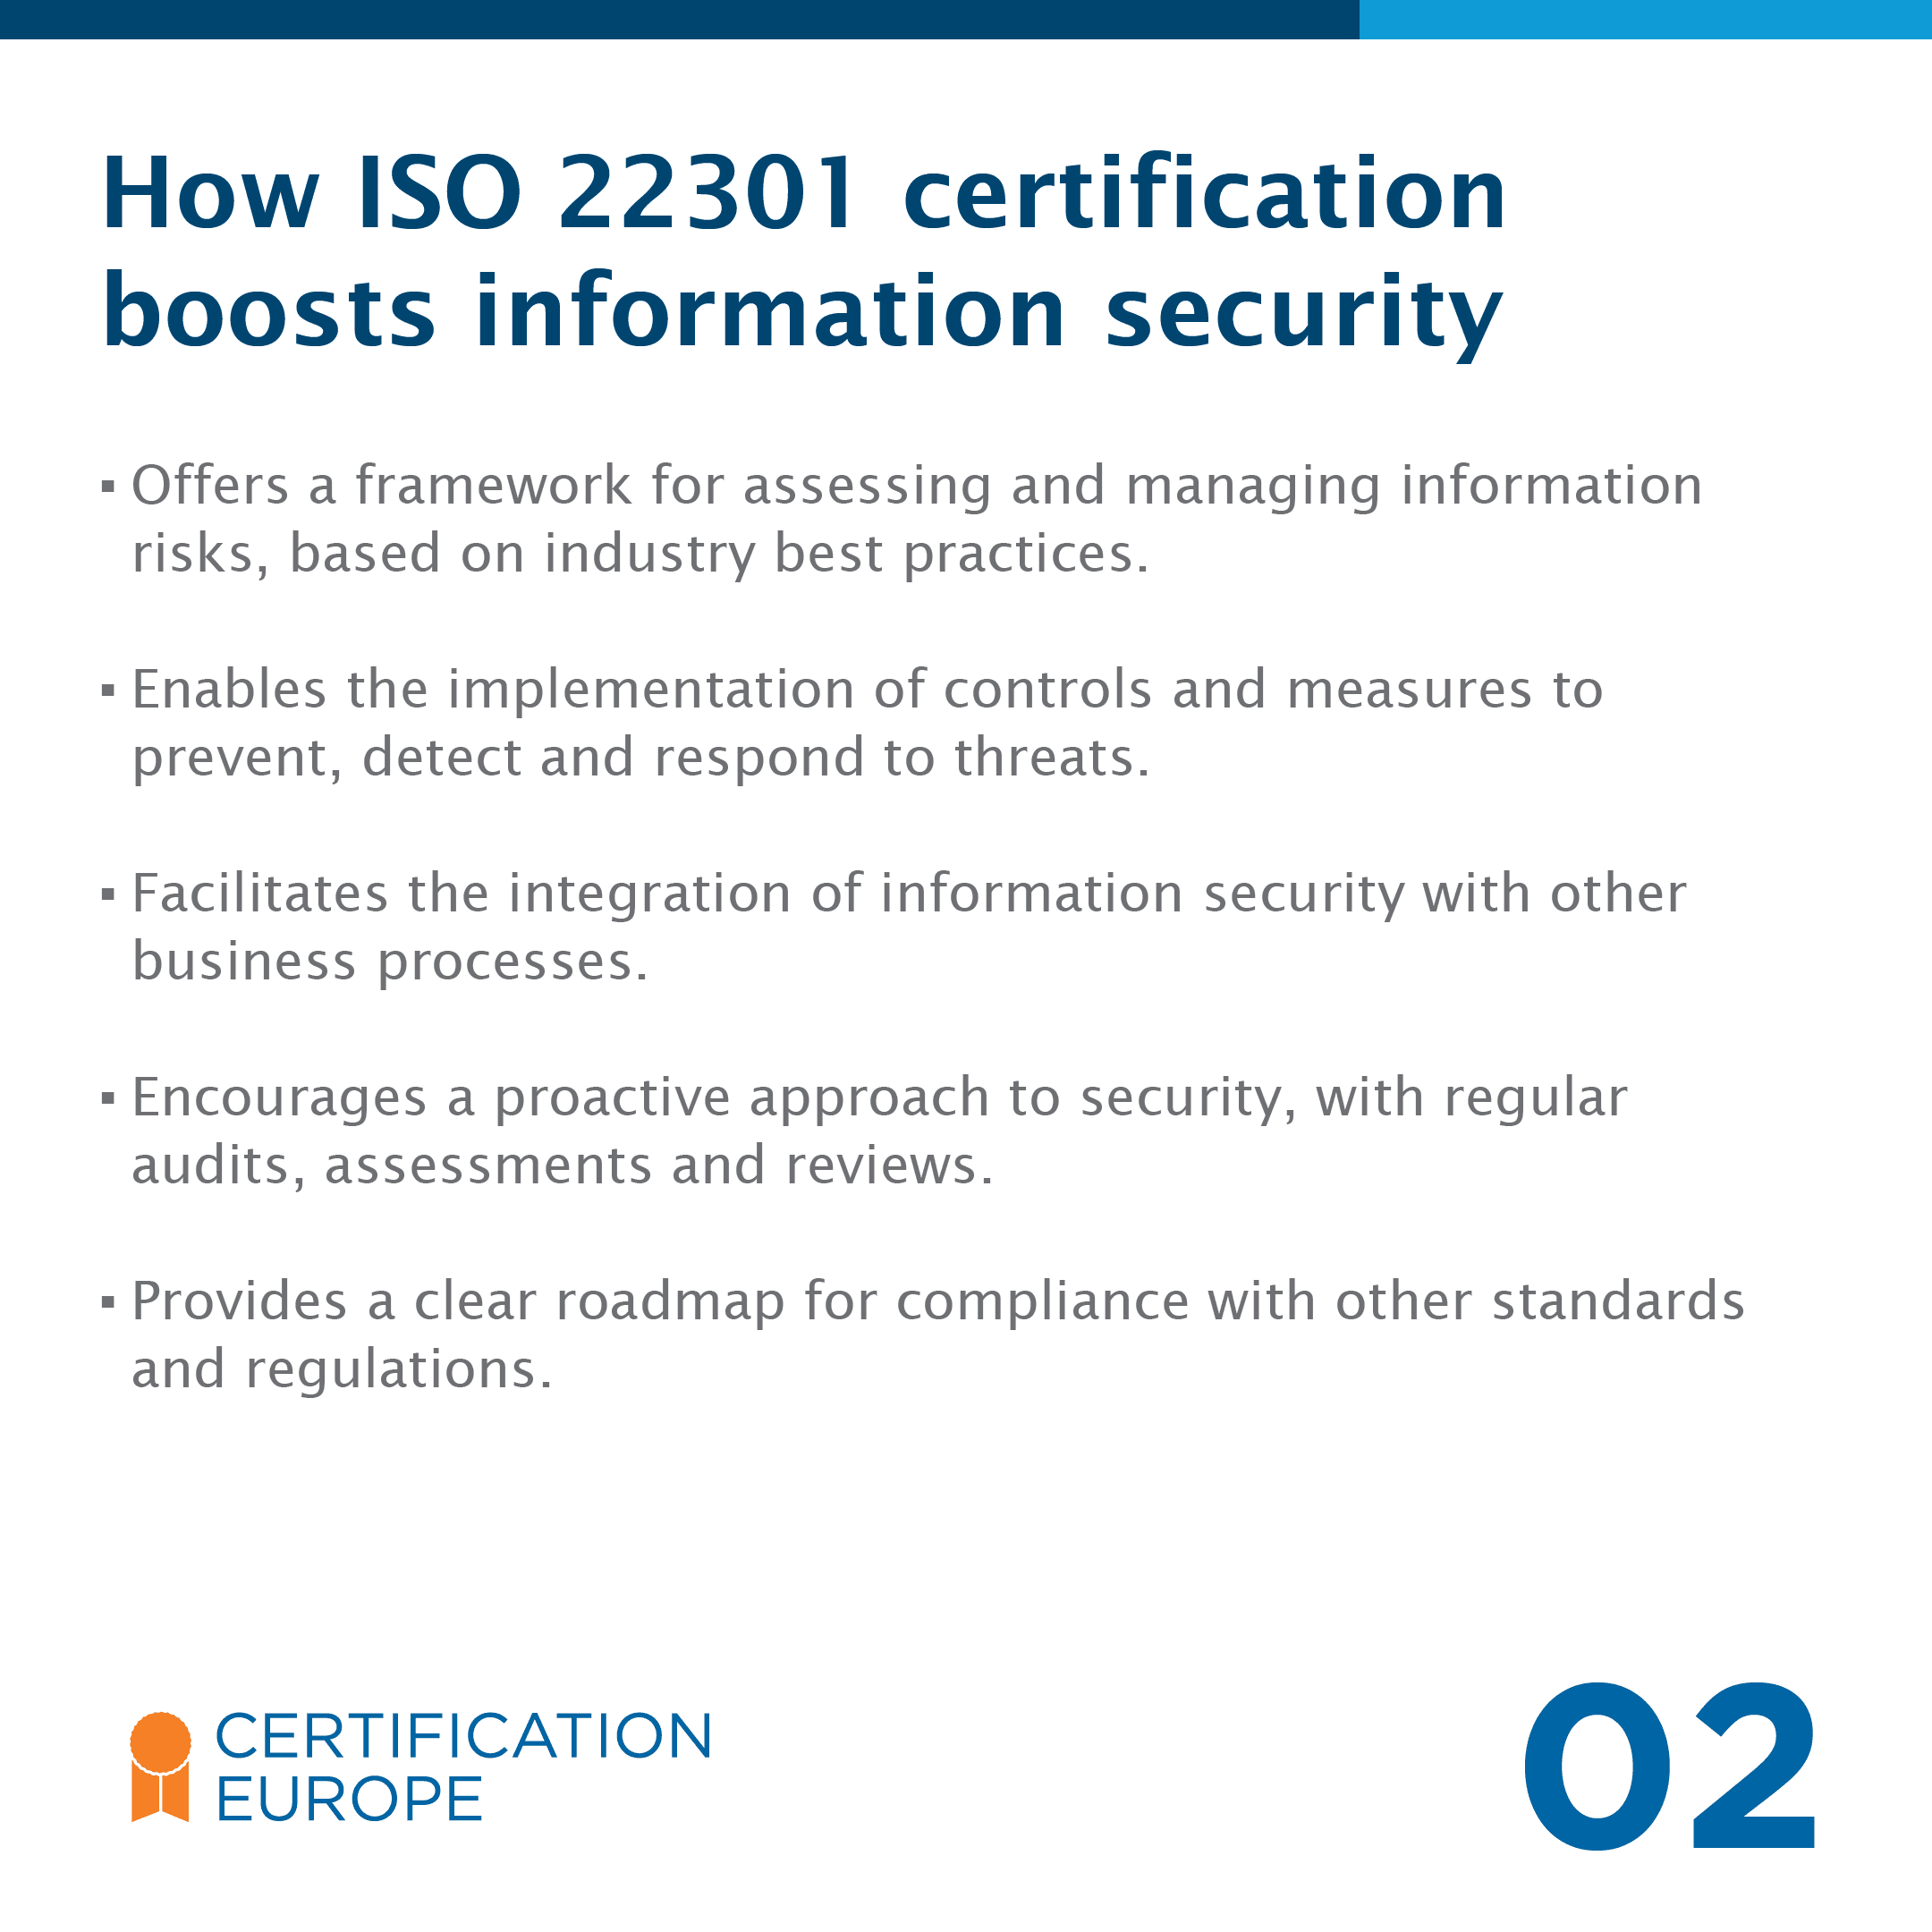 Key benefits of ISO 22301 Certification - 2